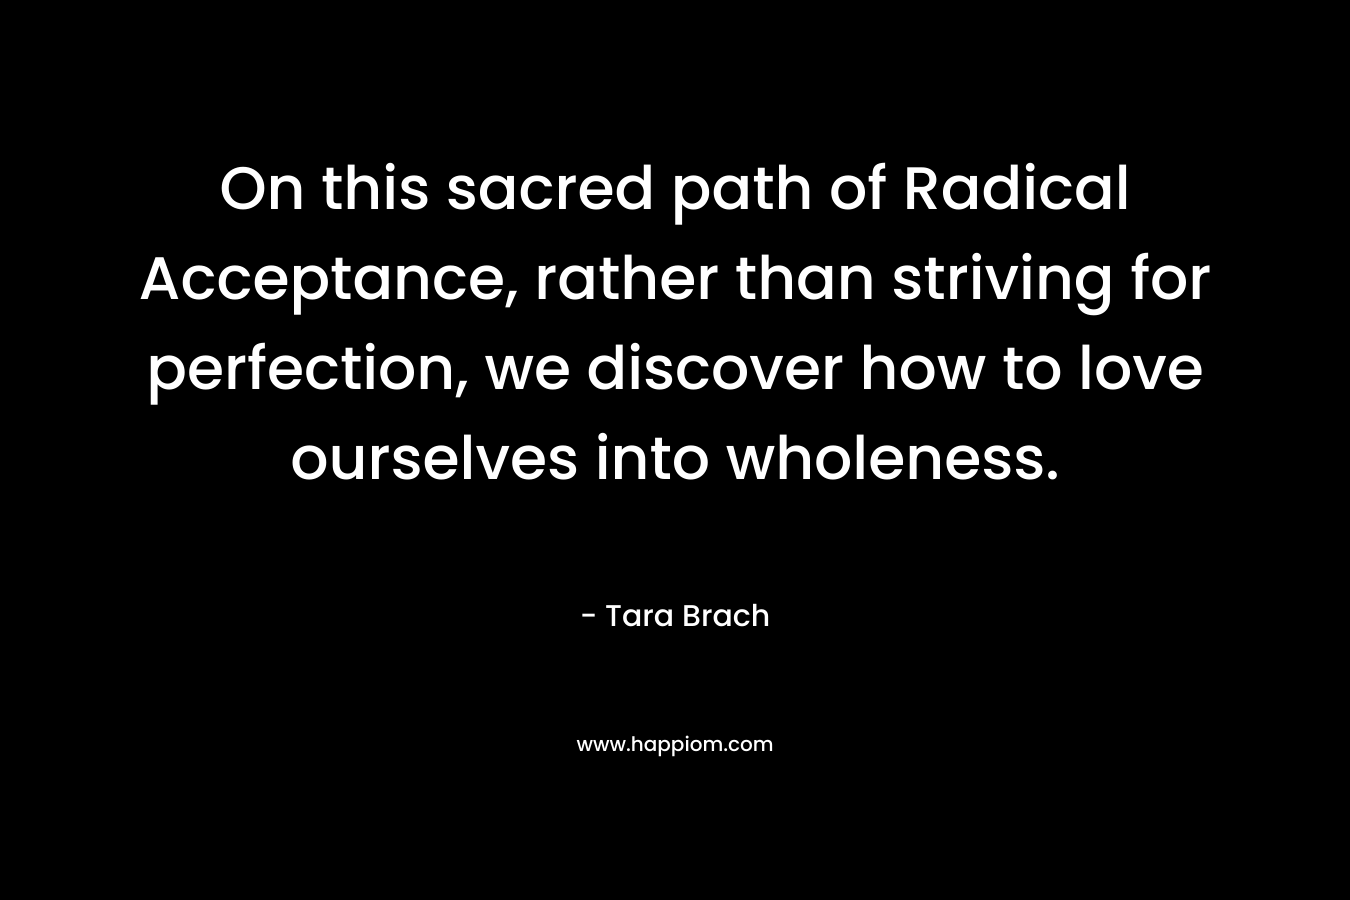 On this sacred path of Radical Acceptance, rather than striving for perfection, we discover how to love ourselves into wholeness. – Tara Brach